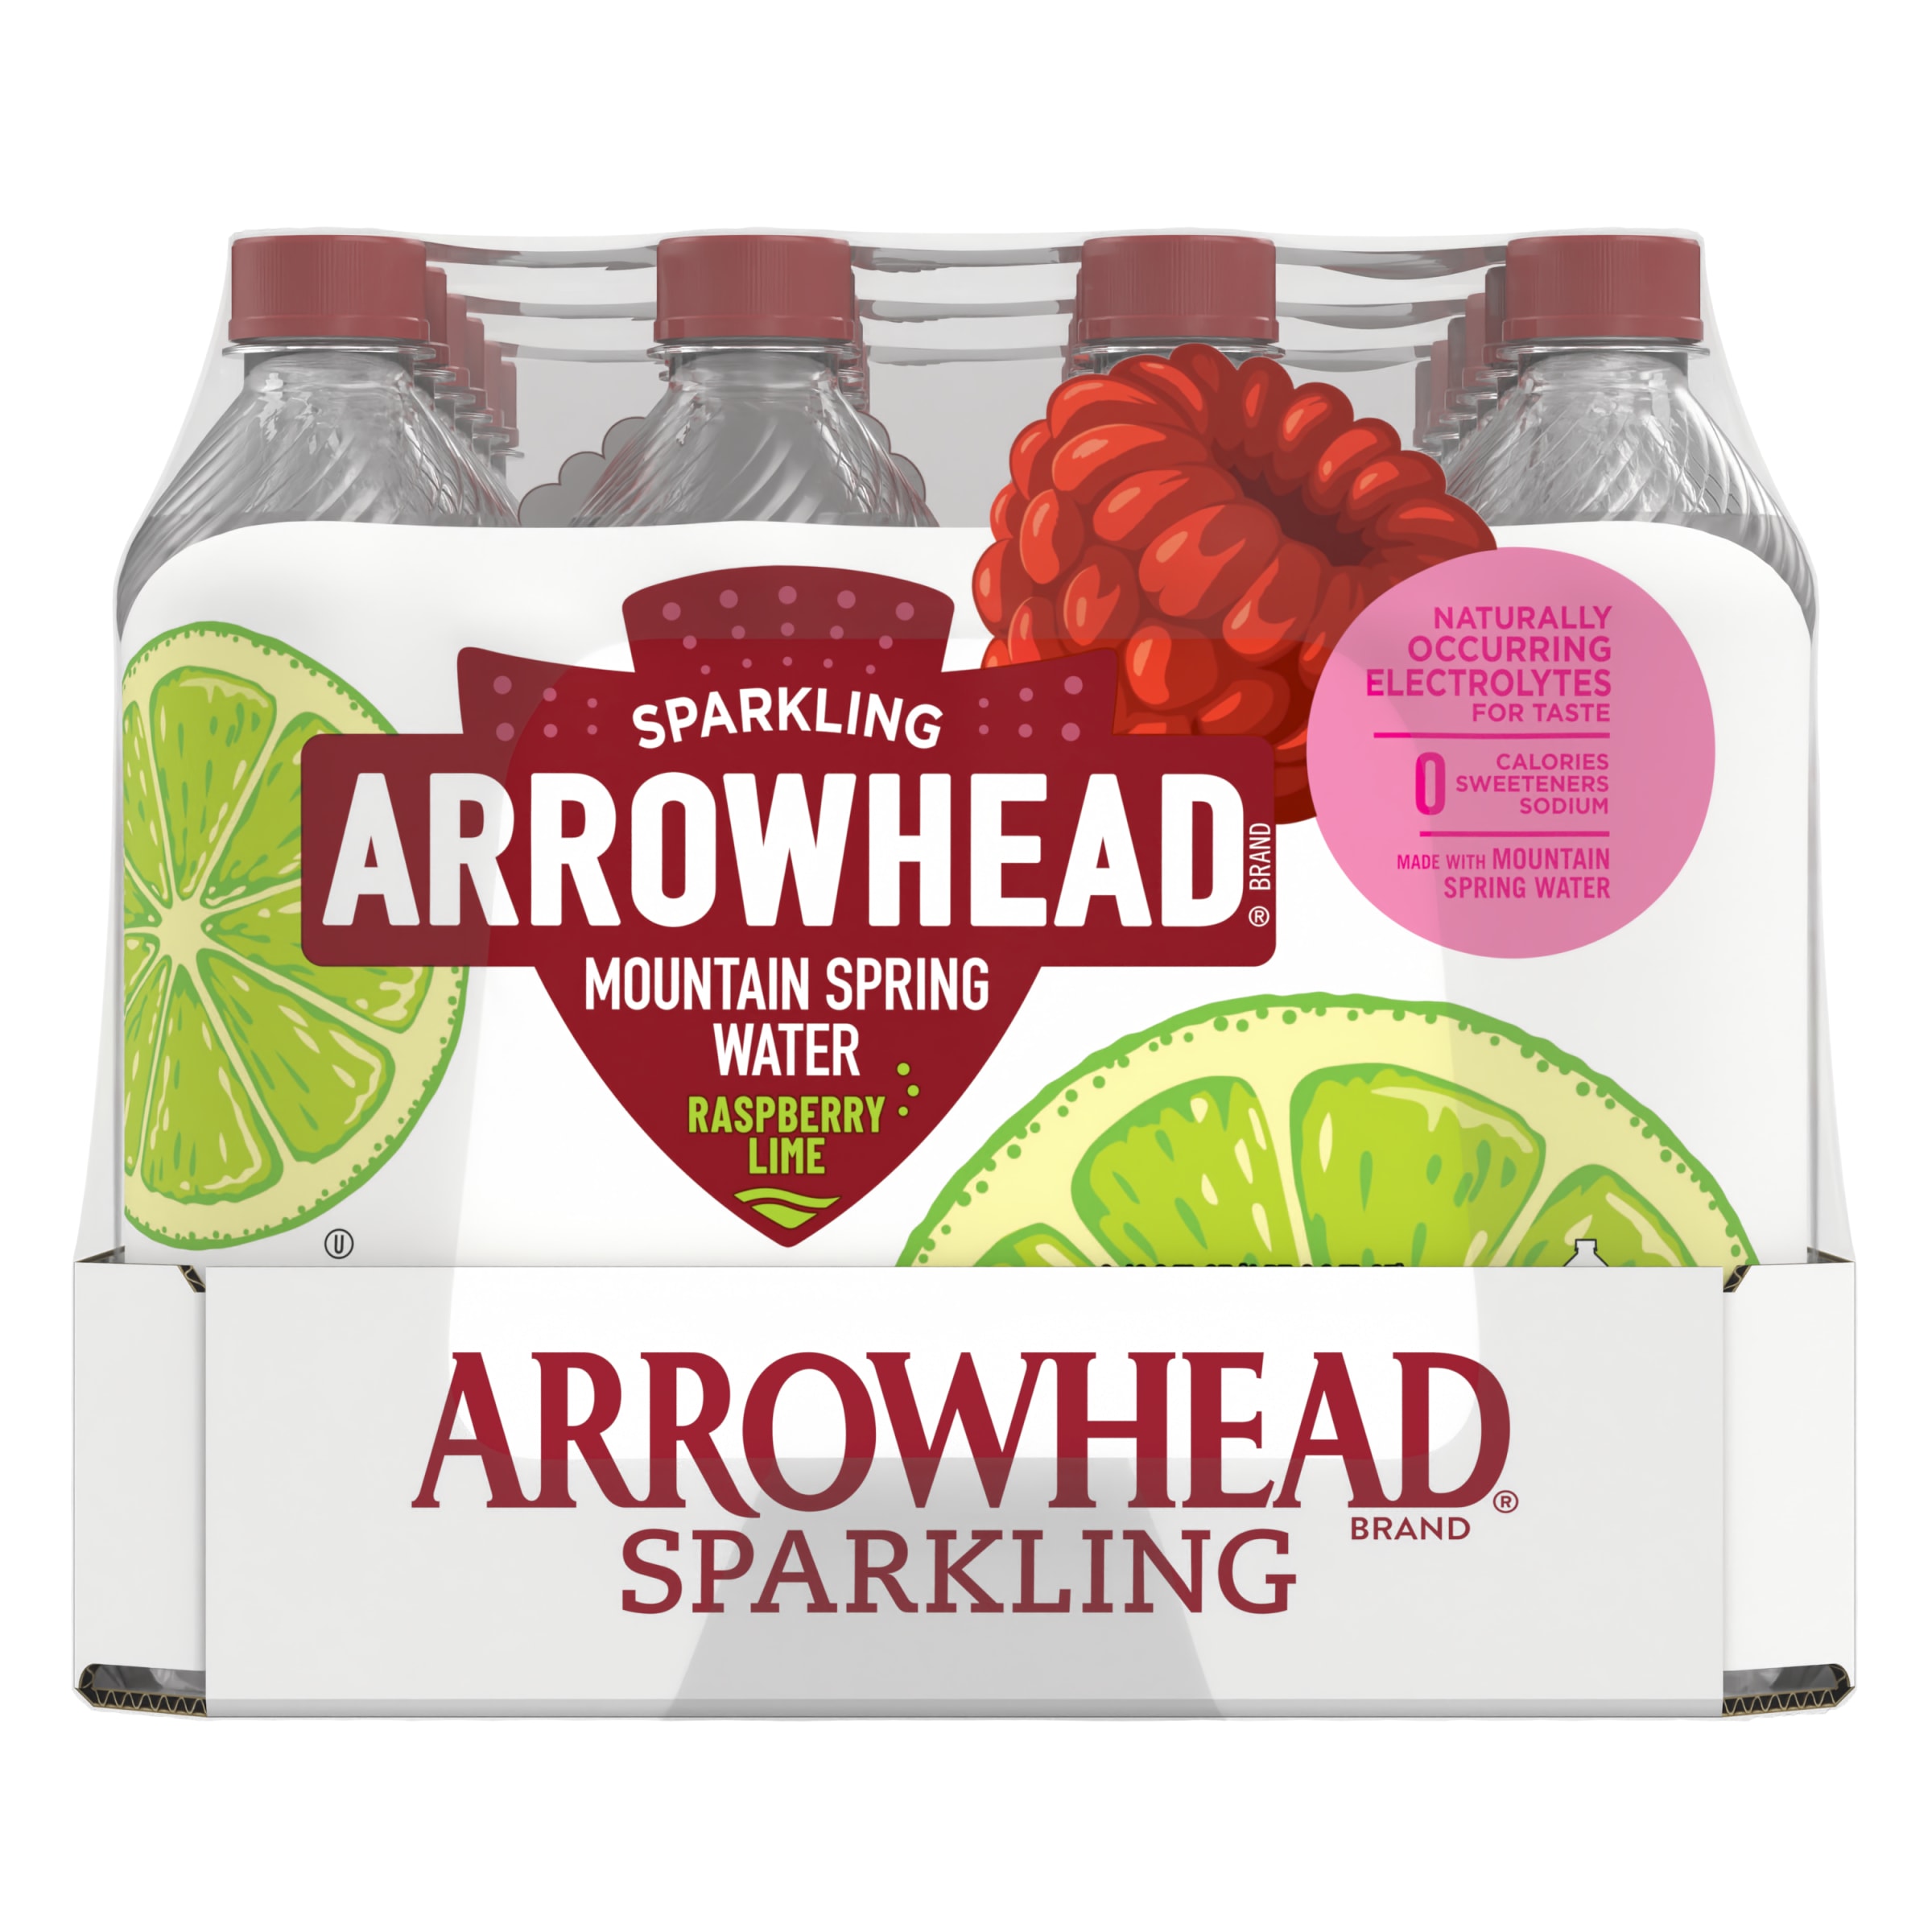 Arrowhead Sparkling Water, Raspberry Lime, 16.9 oz. Bottles (24 Count) - image 3 of 6